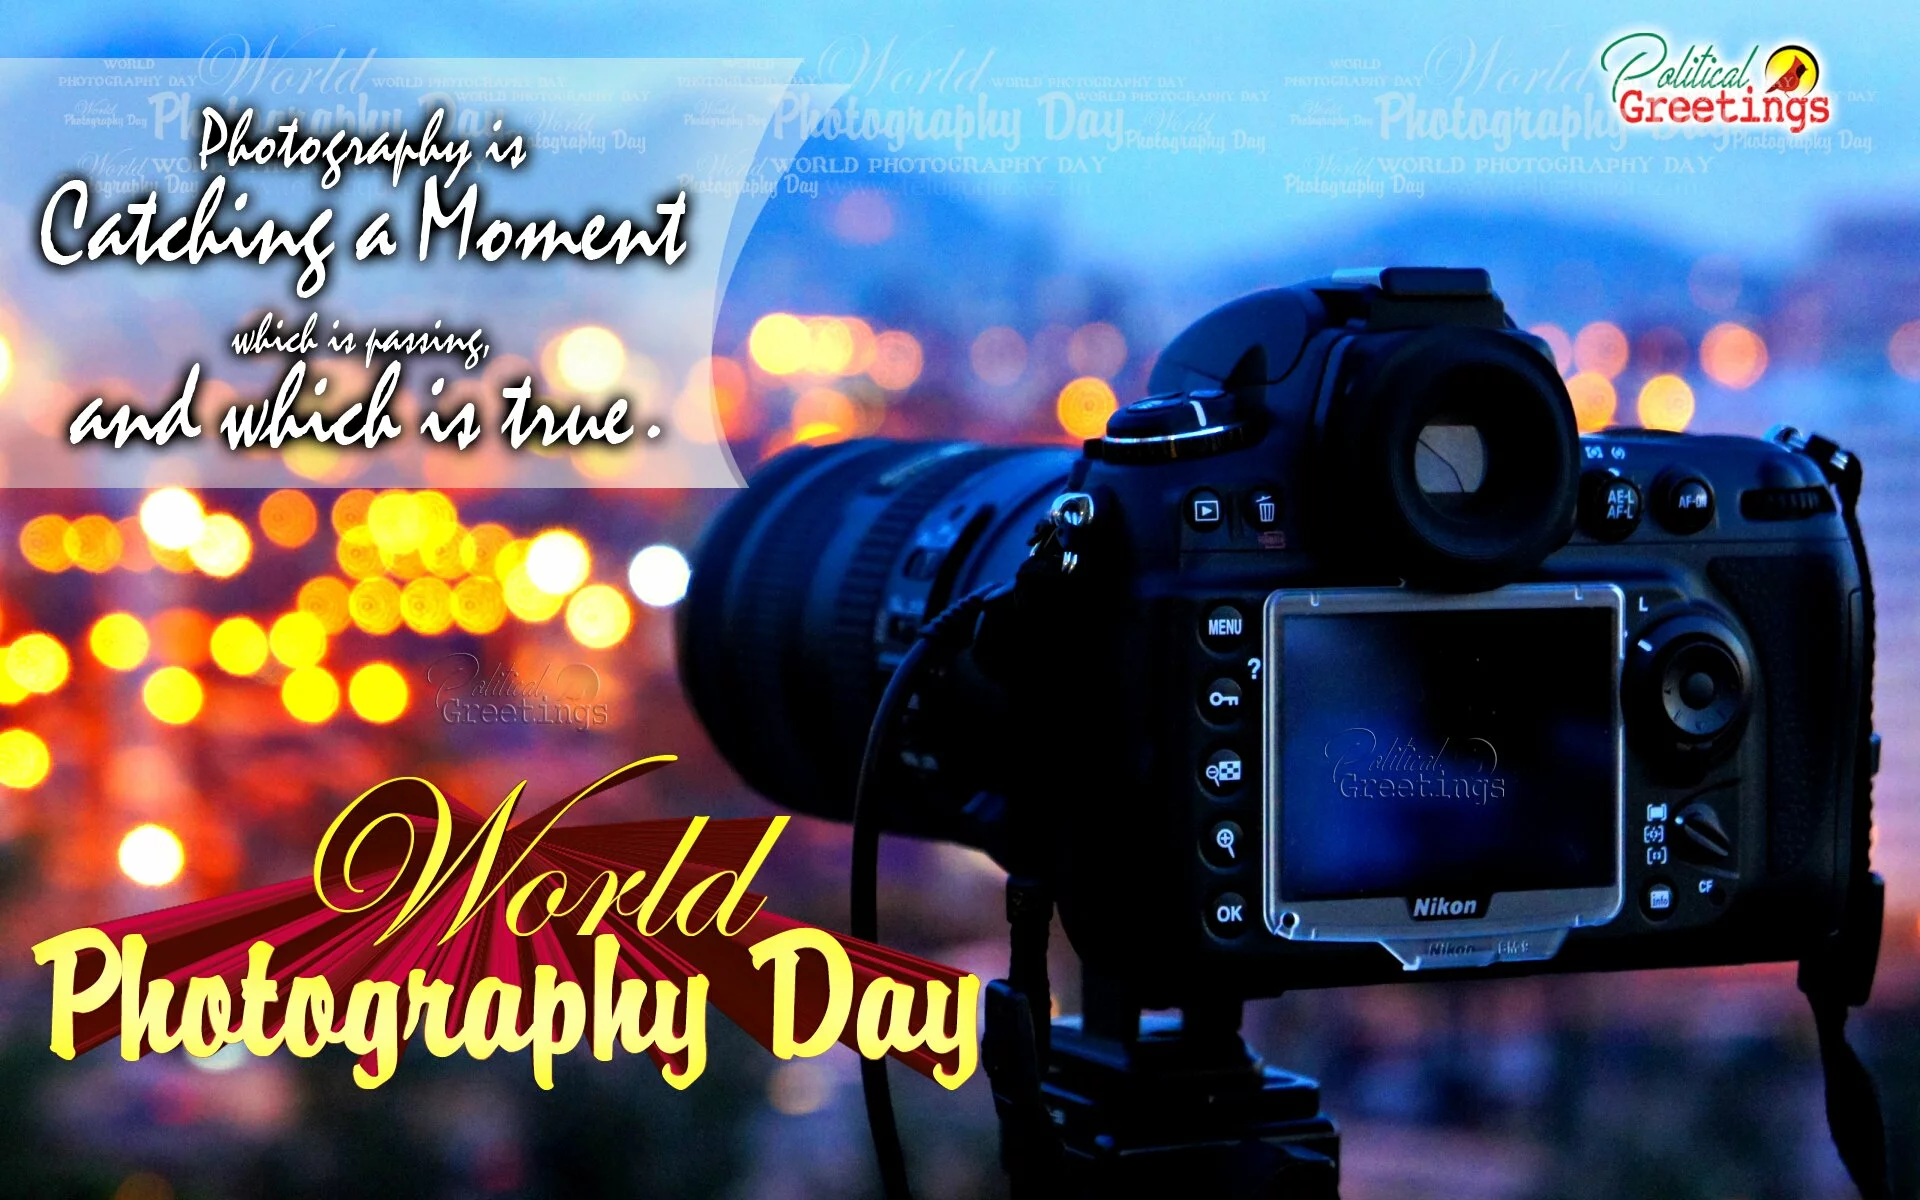 World Photography Day Greetings in English-August 19th World Photography Day English Greetings